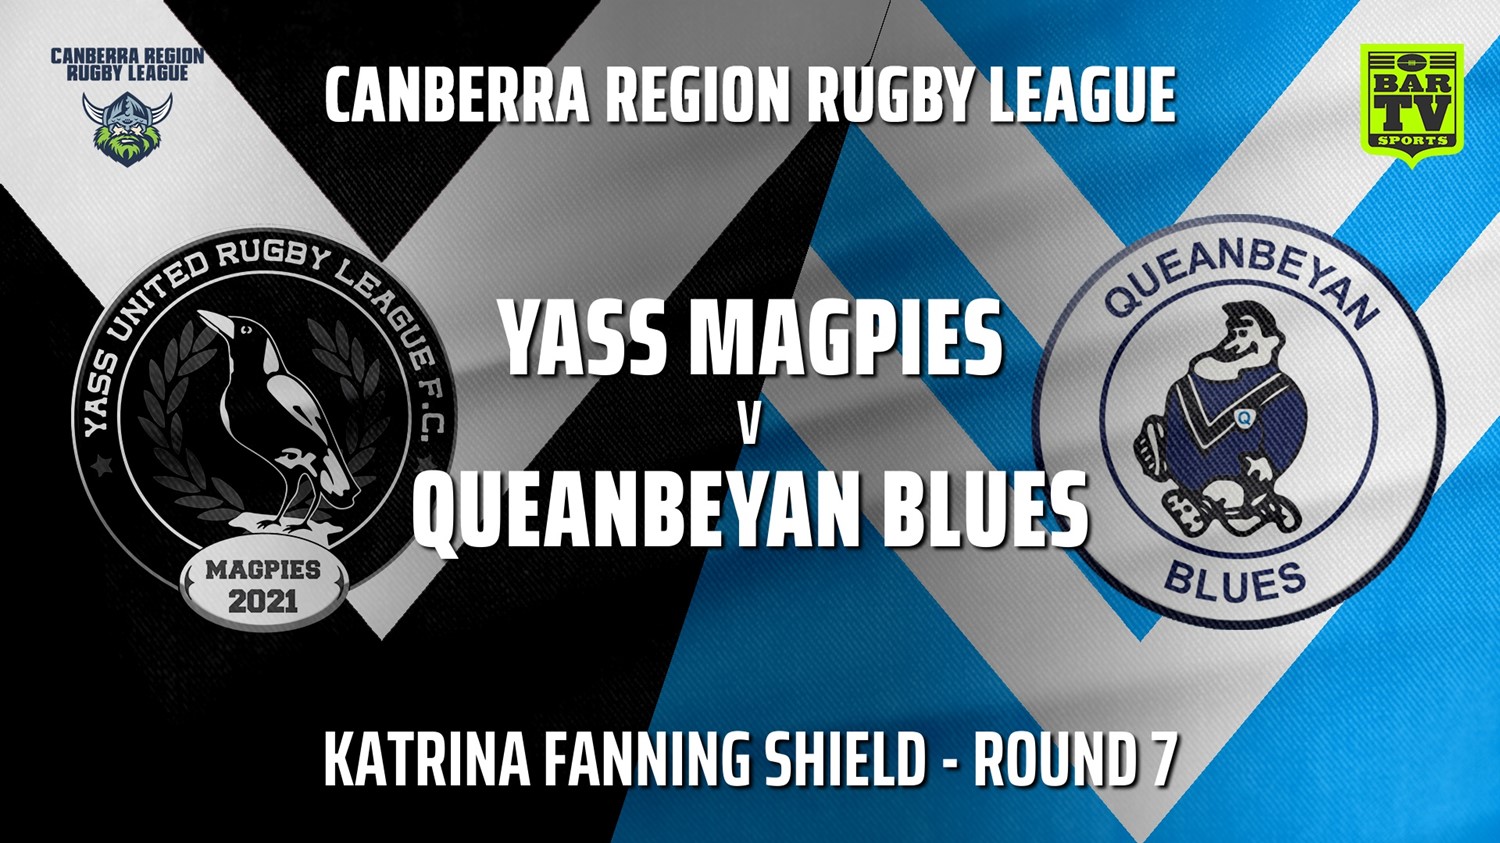 210619-Canberra Round 7 - Katrina Fanning Shield - Yass Magpies v Queanbeyan Blues Slate Image